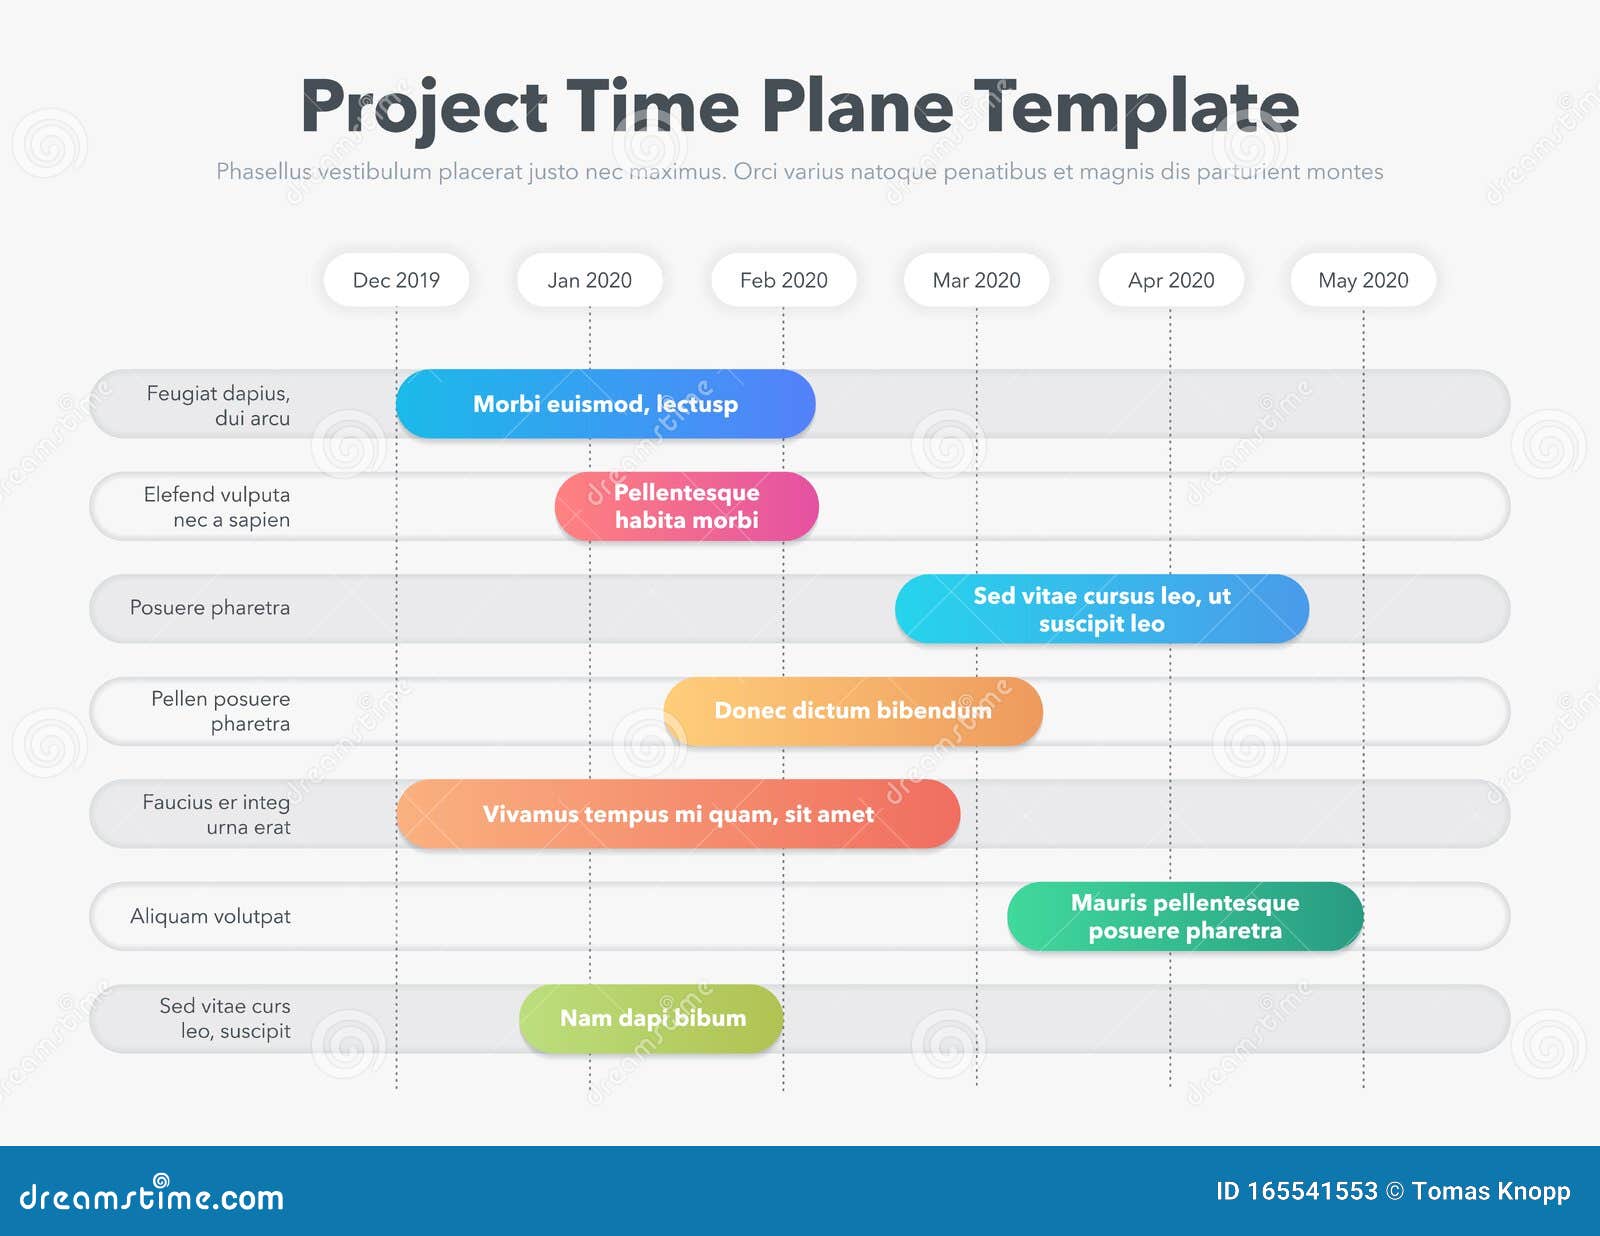 Modern Business Project Time Plan Template with Project Tasks in Regarding Business Plan Template For Website